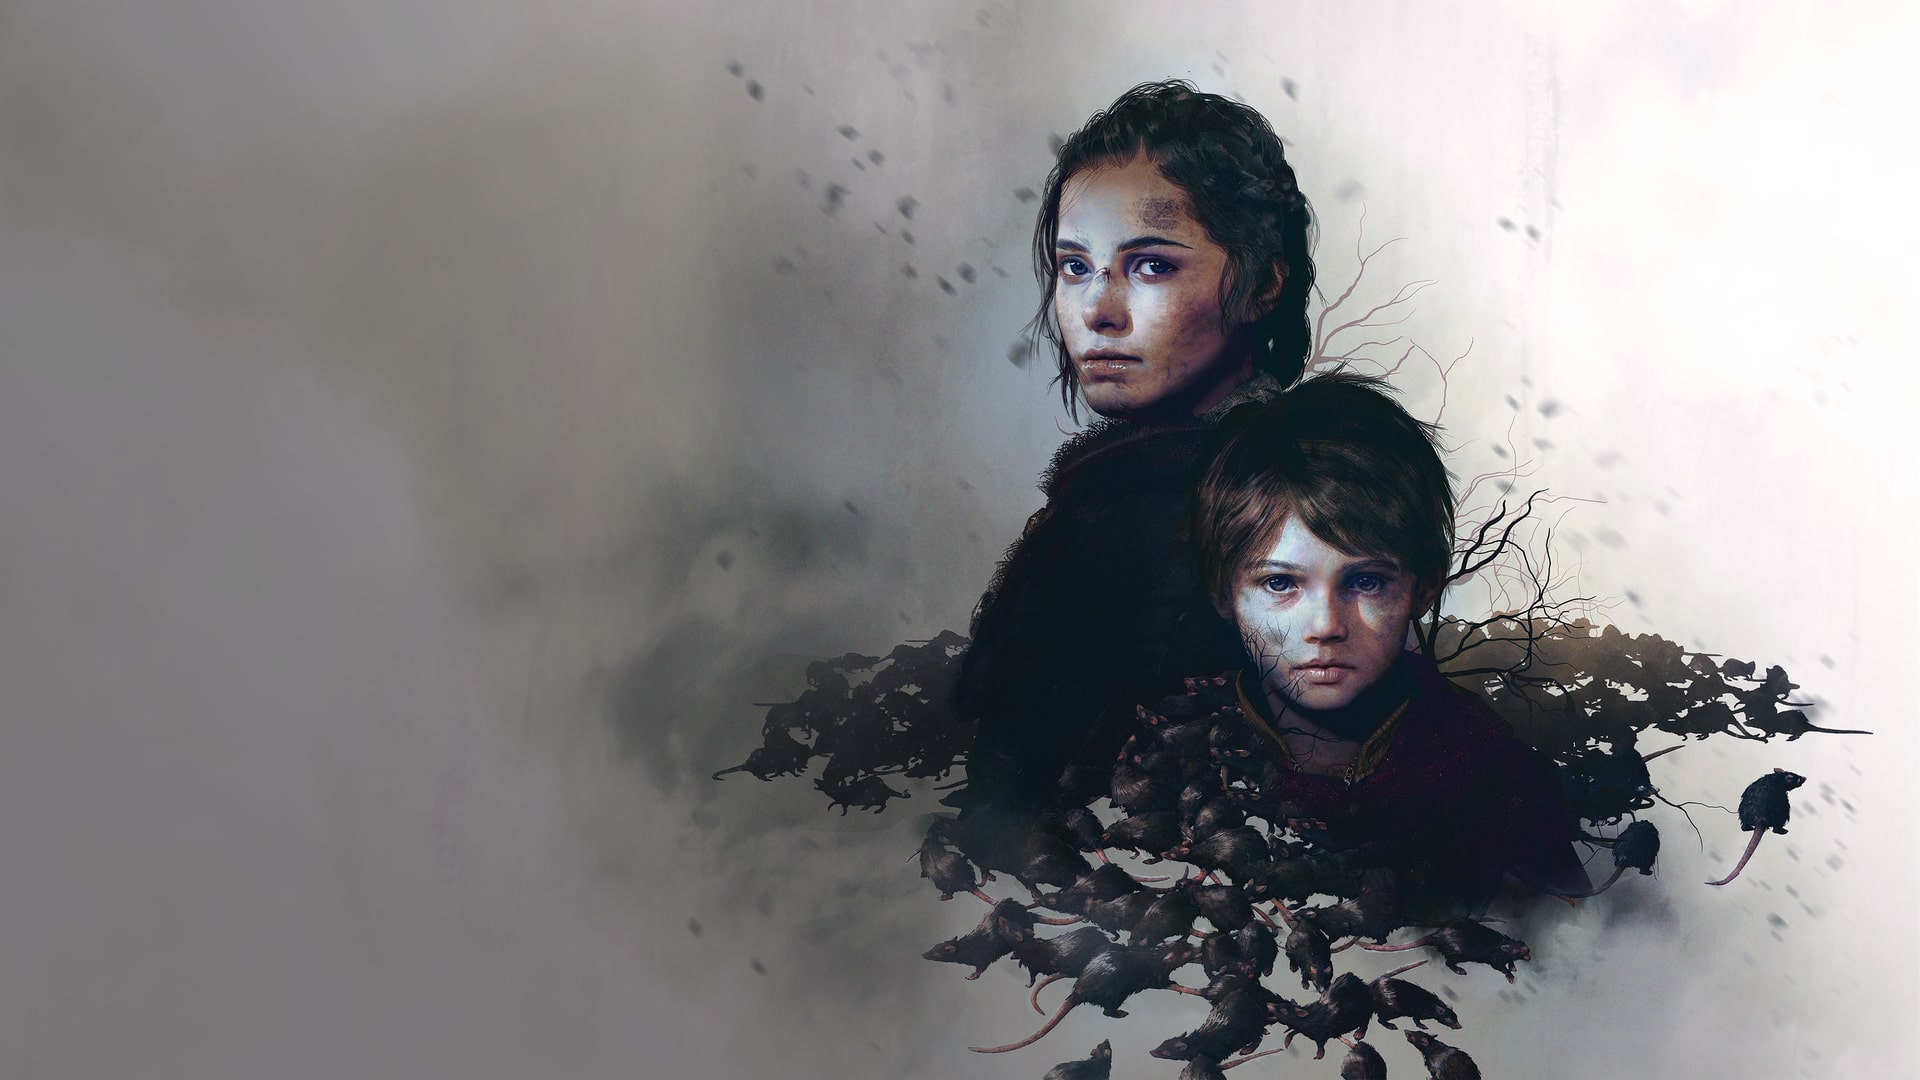 PlayStation on X: A Plague Tale: Innocence for PS5, Call of Duty